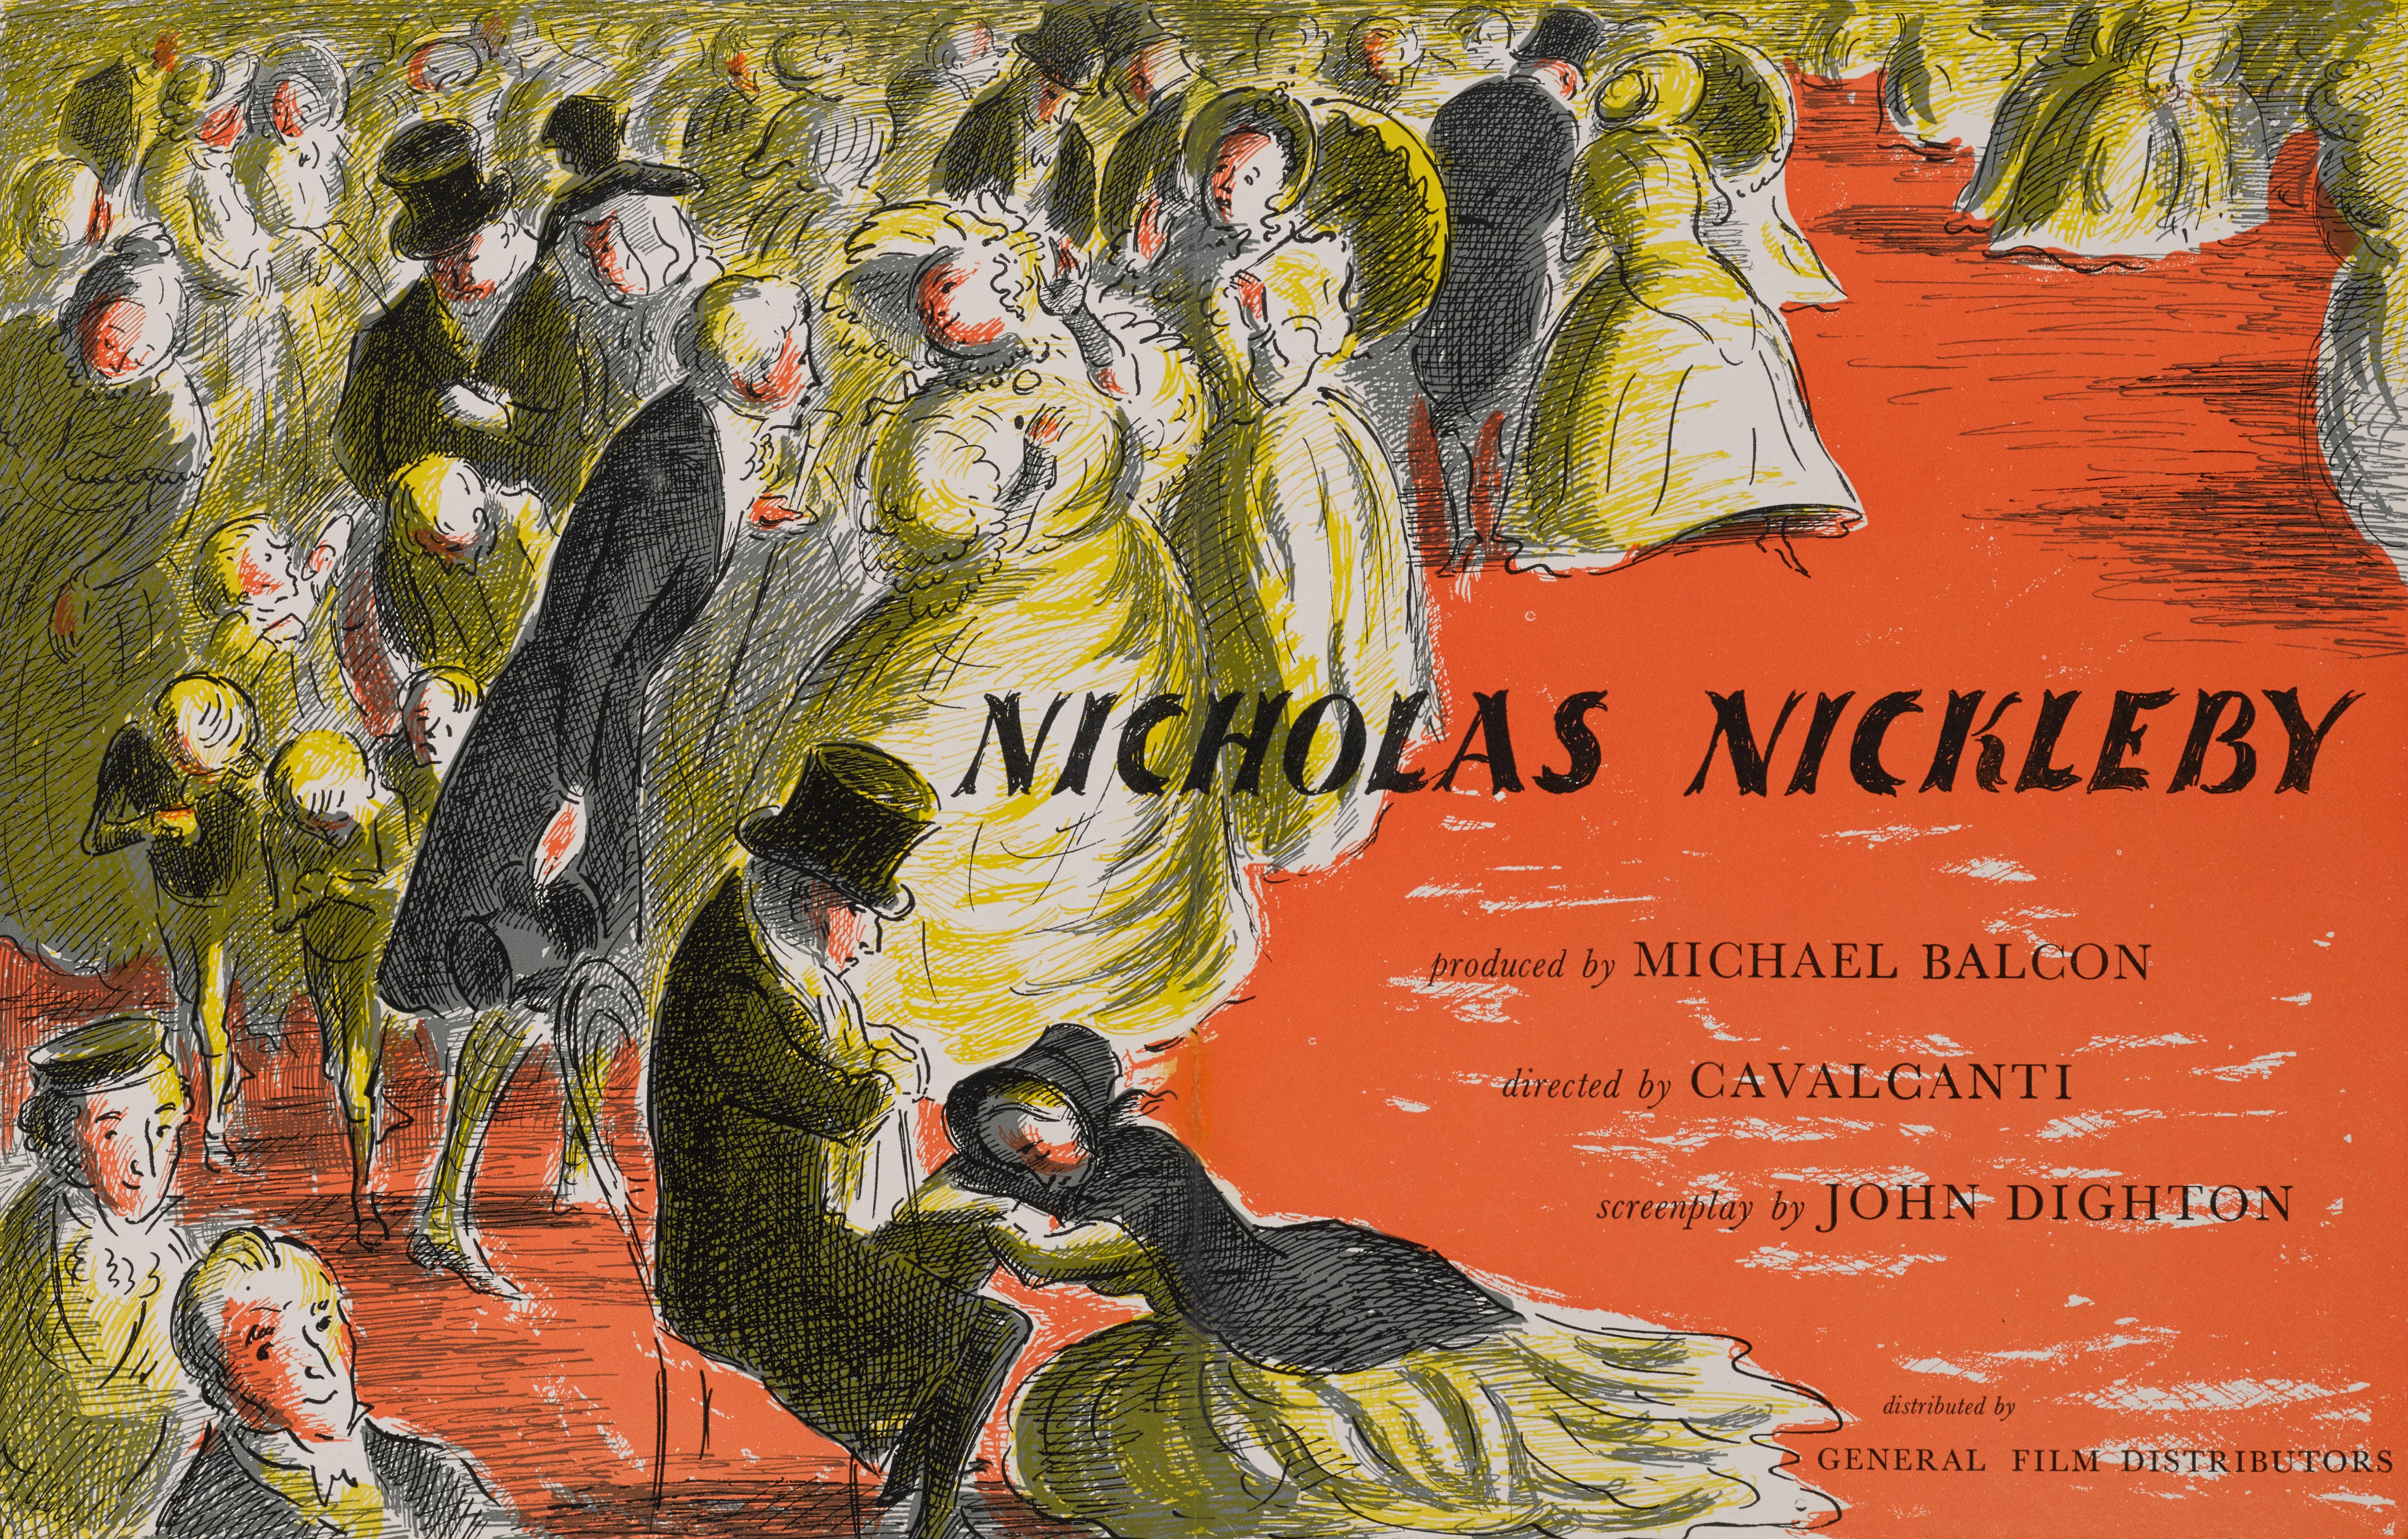 Original British trade advertisement for the 1947 film Nicholas Nickleby.
The film was directed byAlberto Cavalcanti and starred Derek Bond, Cedric Hardwicke,
Mary Merrall. The art work is by Edward Ardizzone (1900-1979).
This piece is